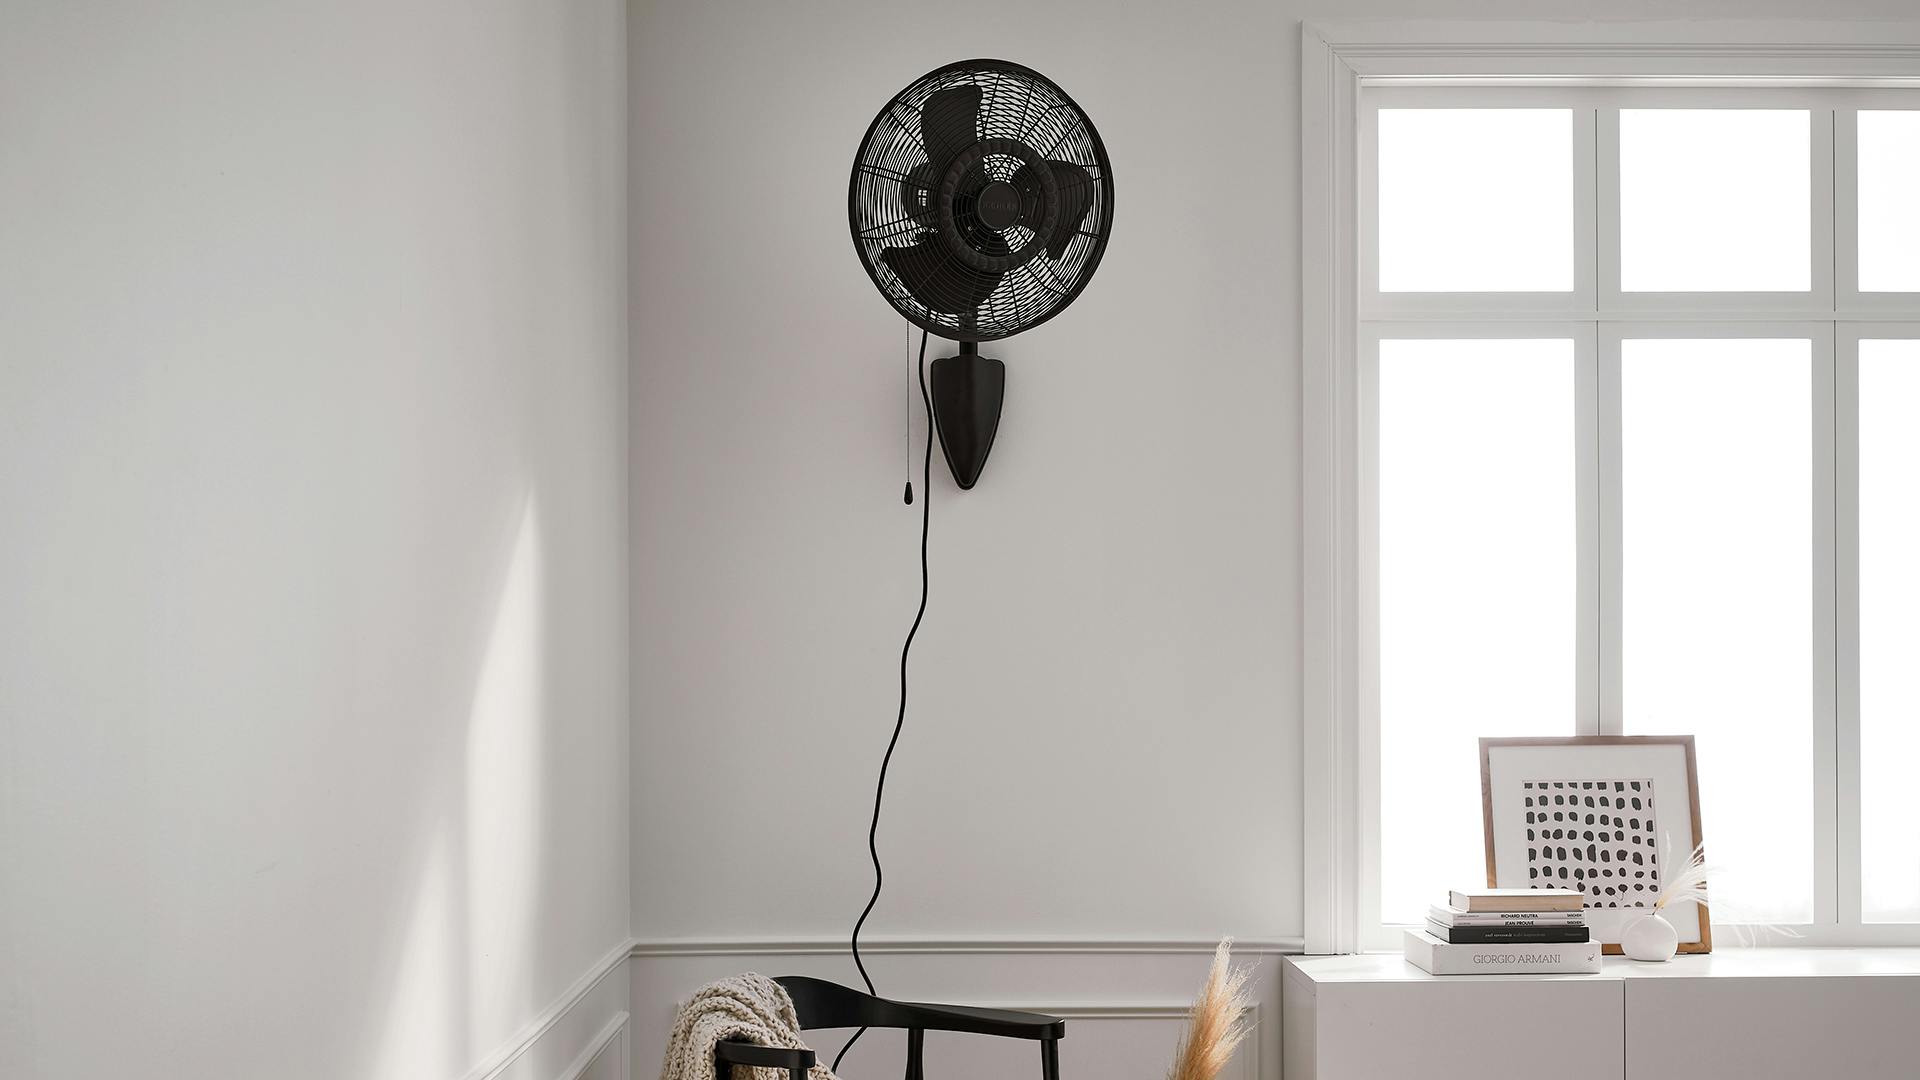 Pola wall fan in living room during the day.